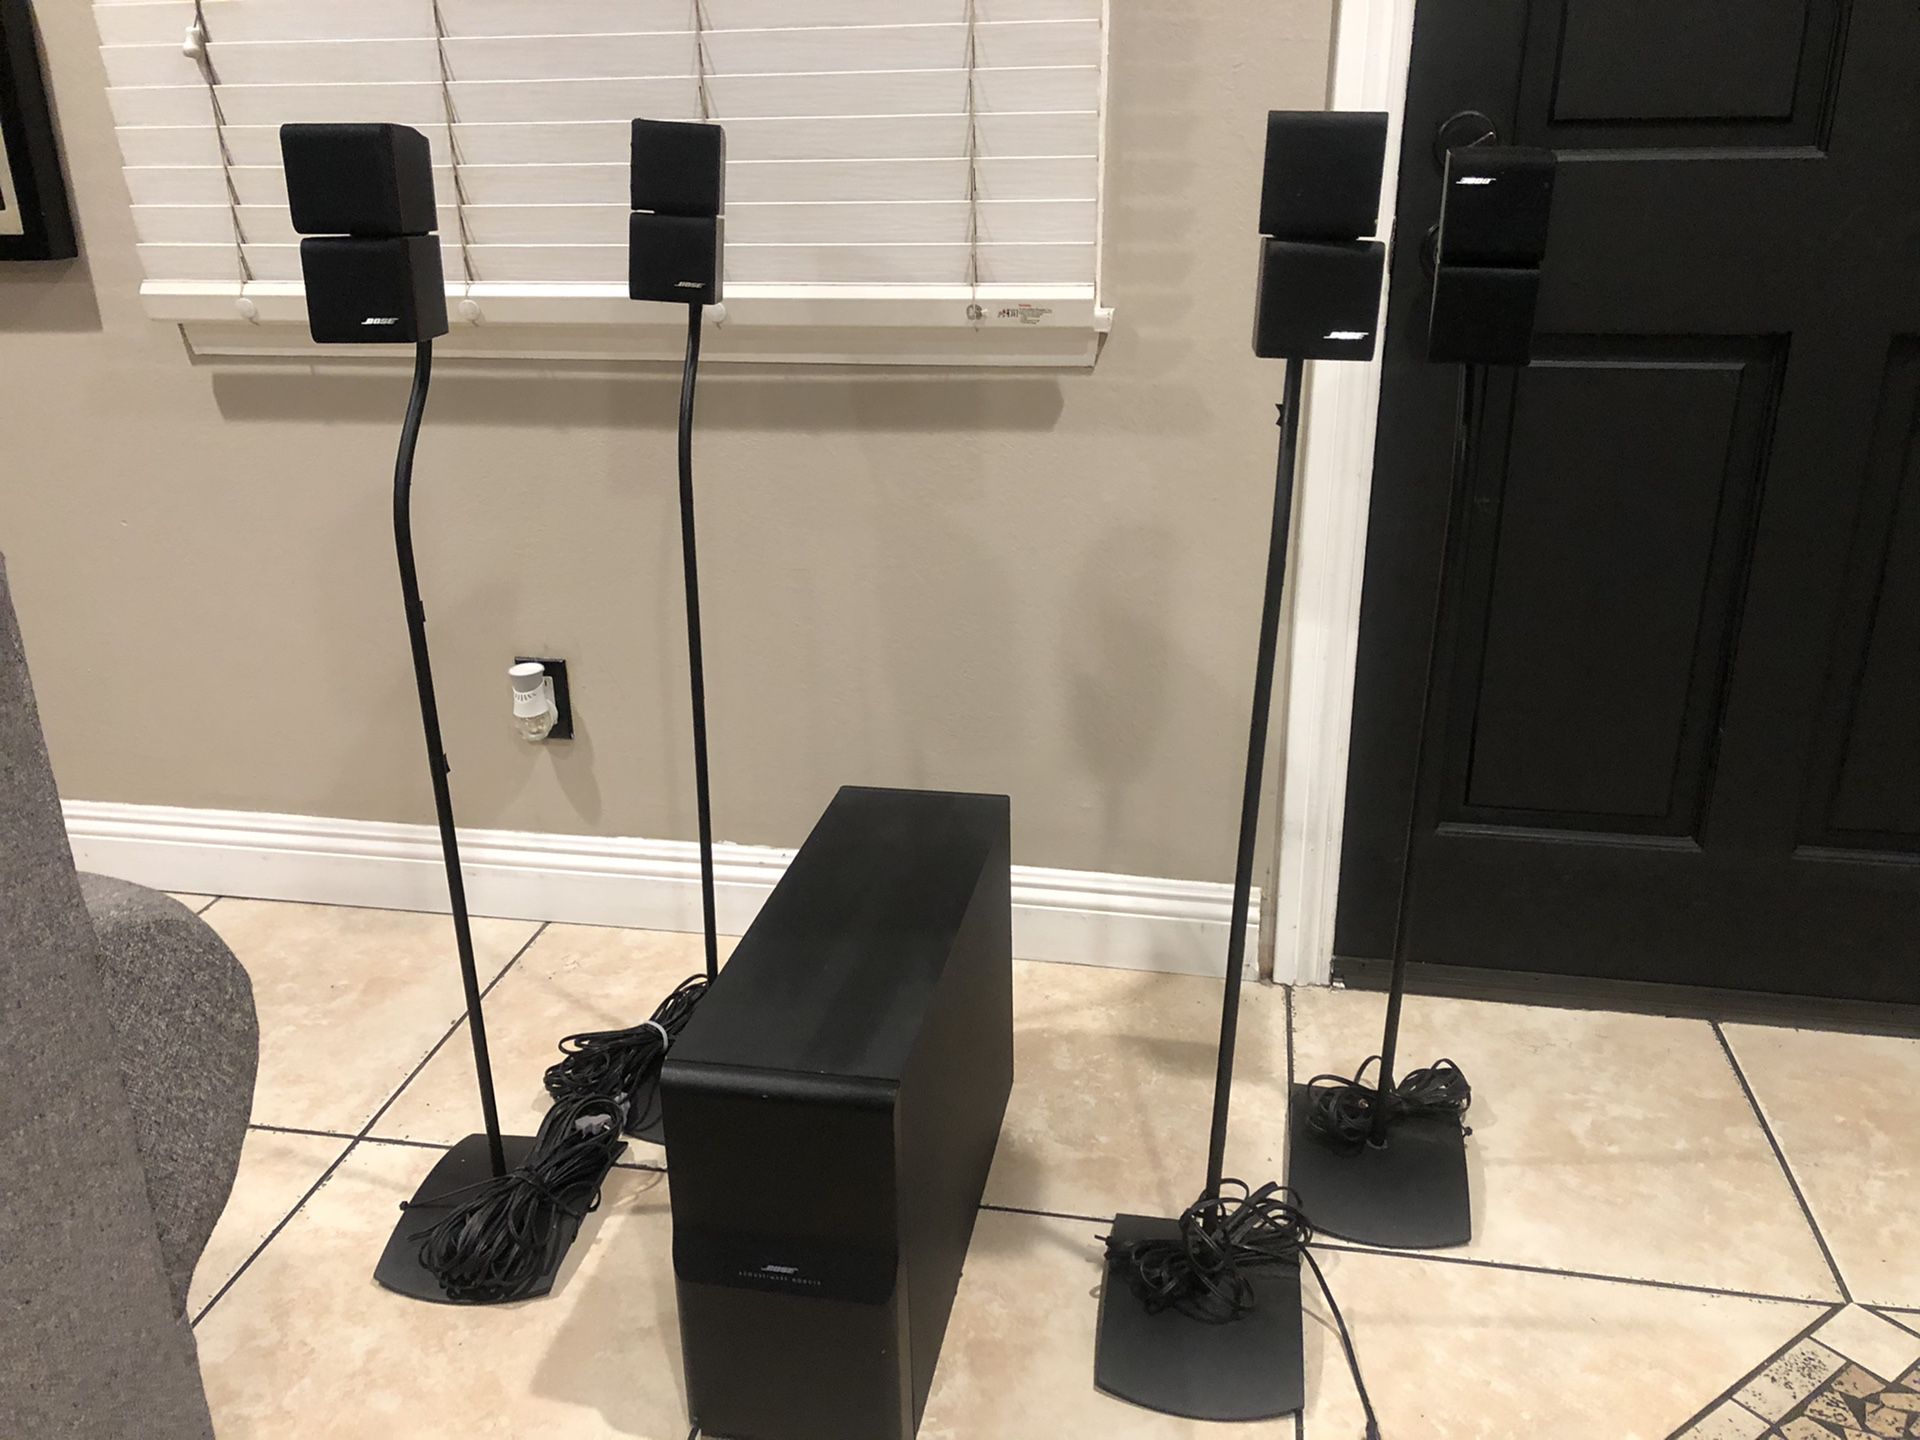 Bose Double cube speakers & bass Theater Surround System w/ stands